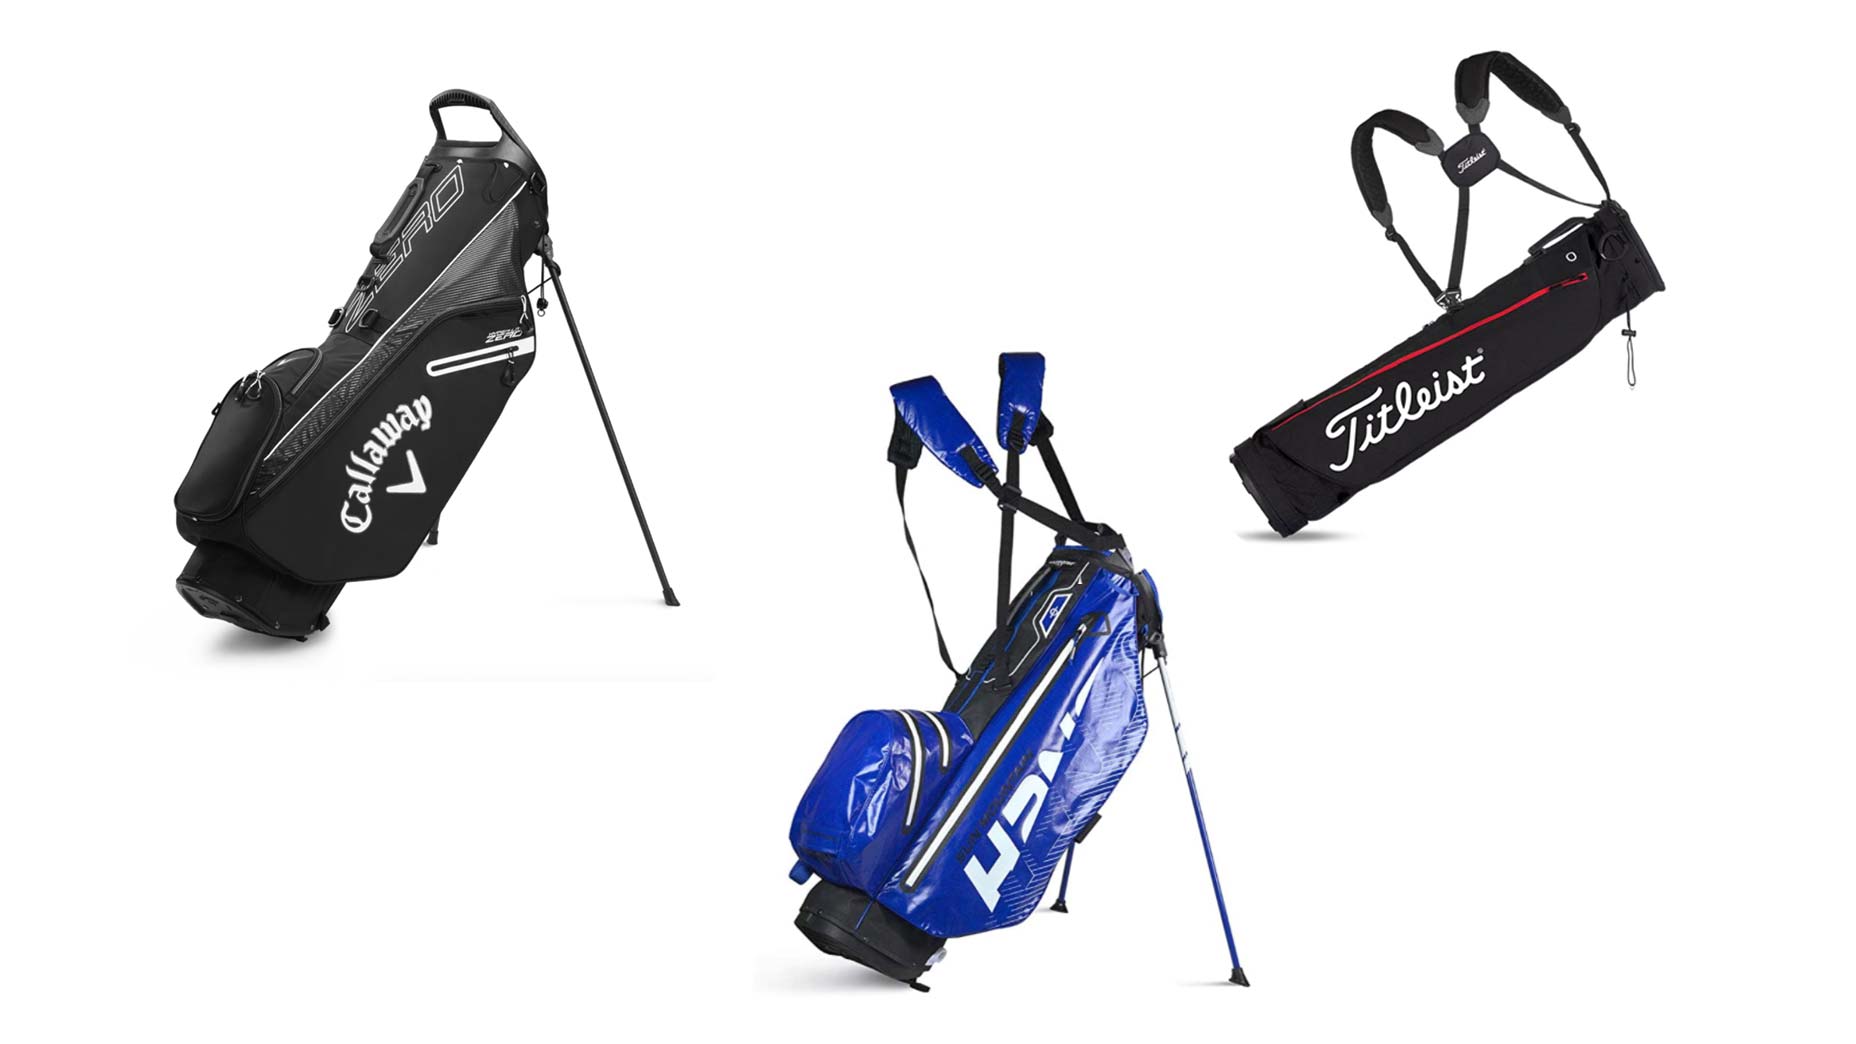 Here are the 8 best lightweight golf bags perfect for walking the 